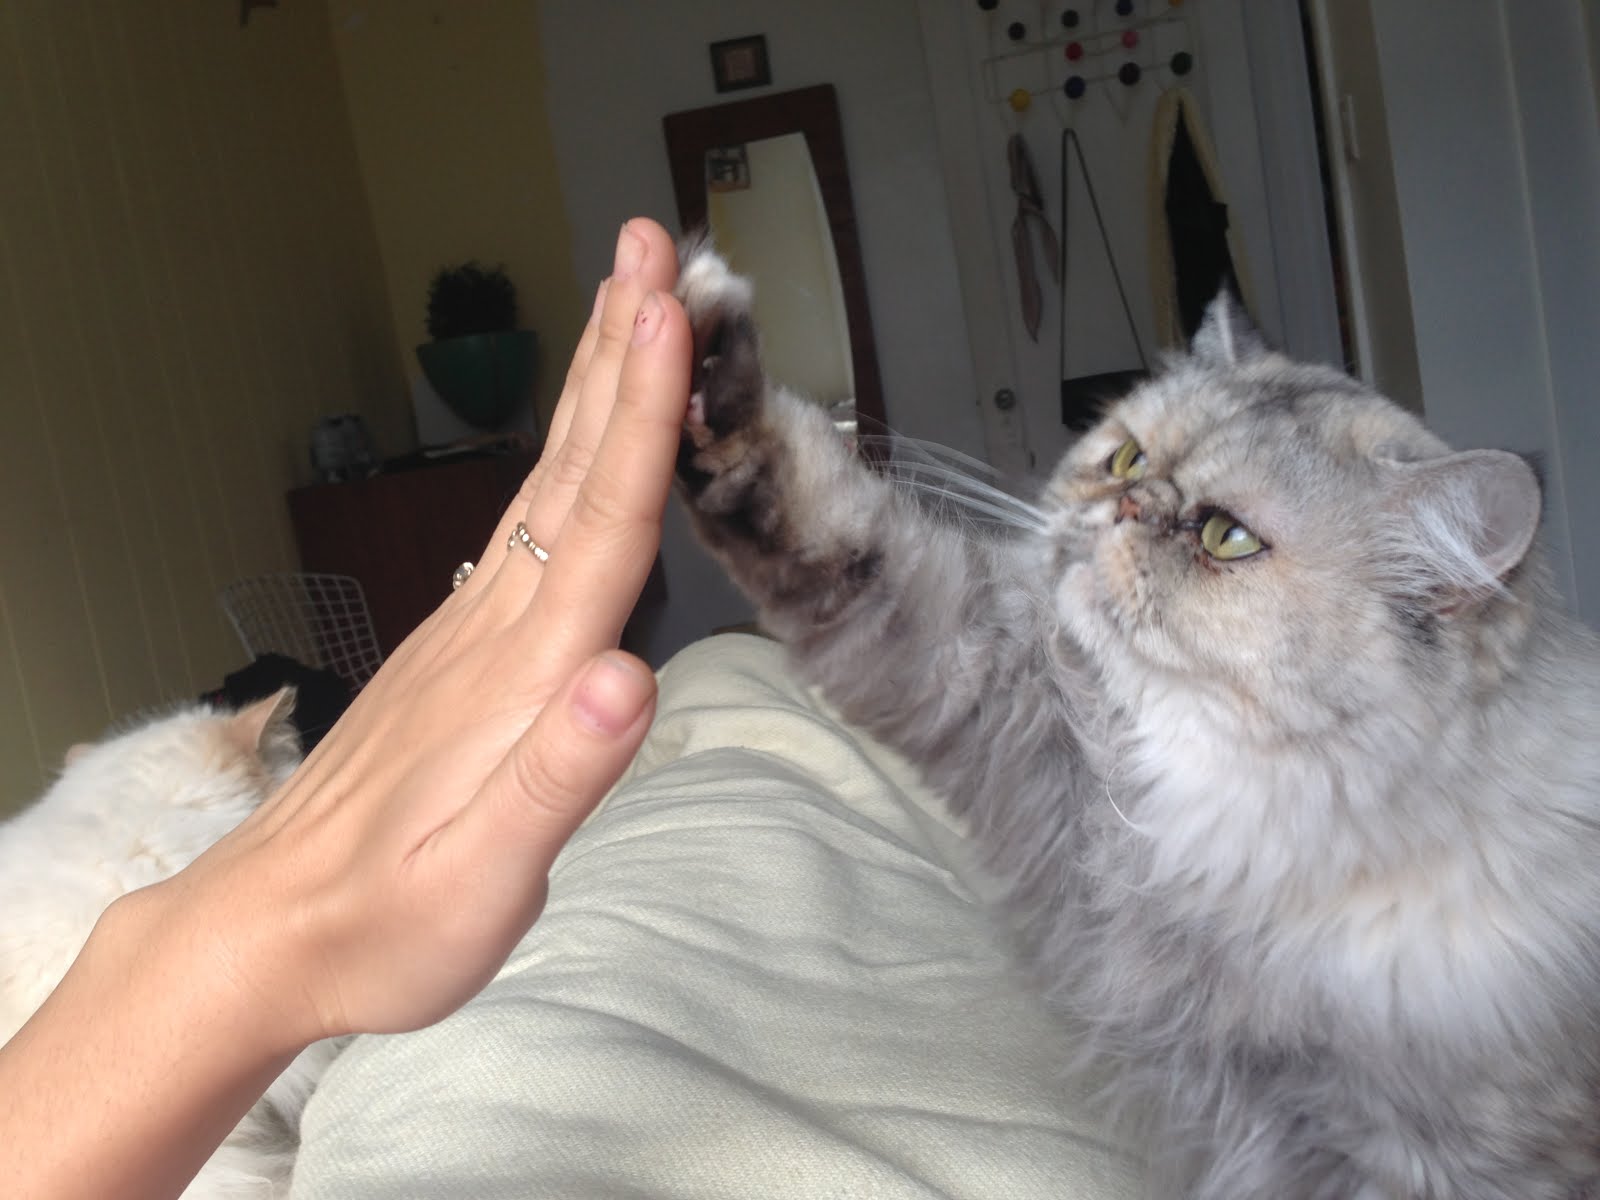 22 of the coolest cats giving a cool high five!